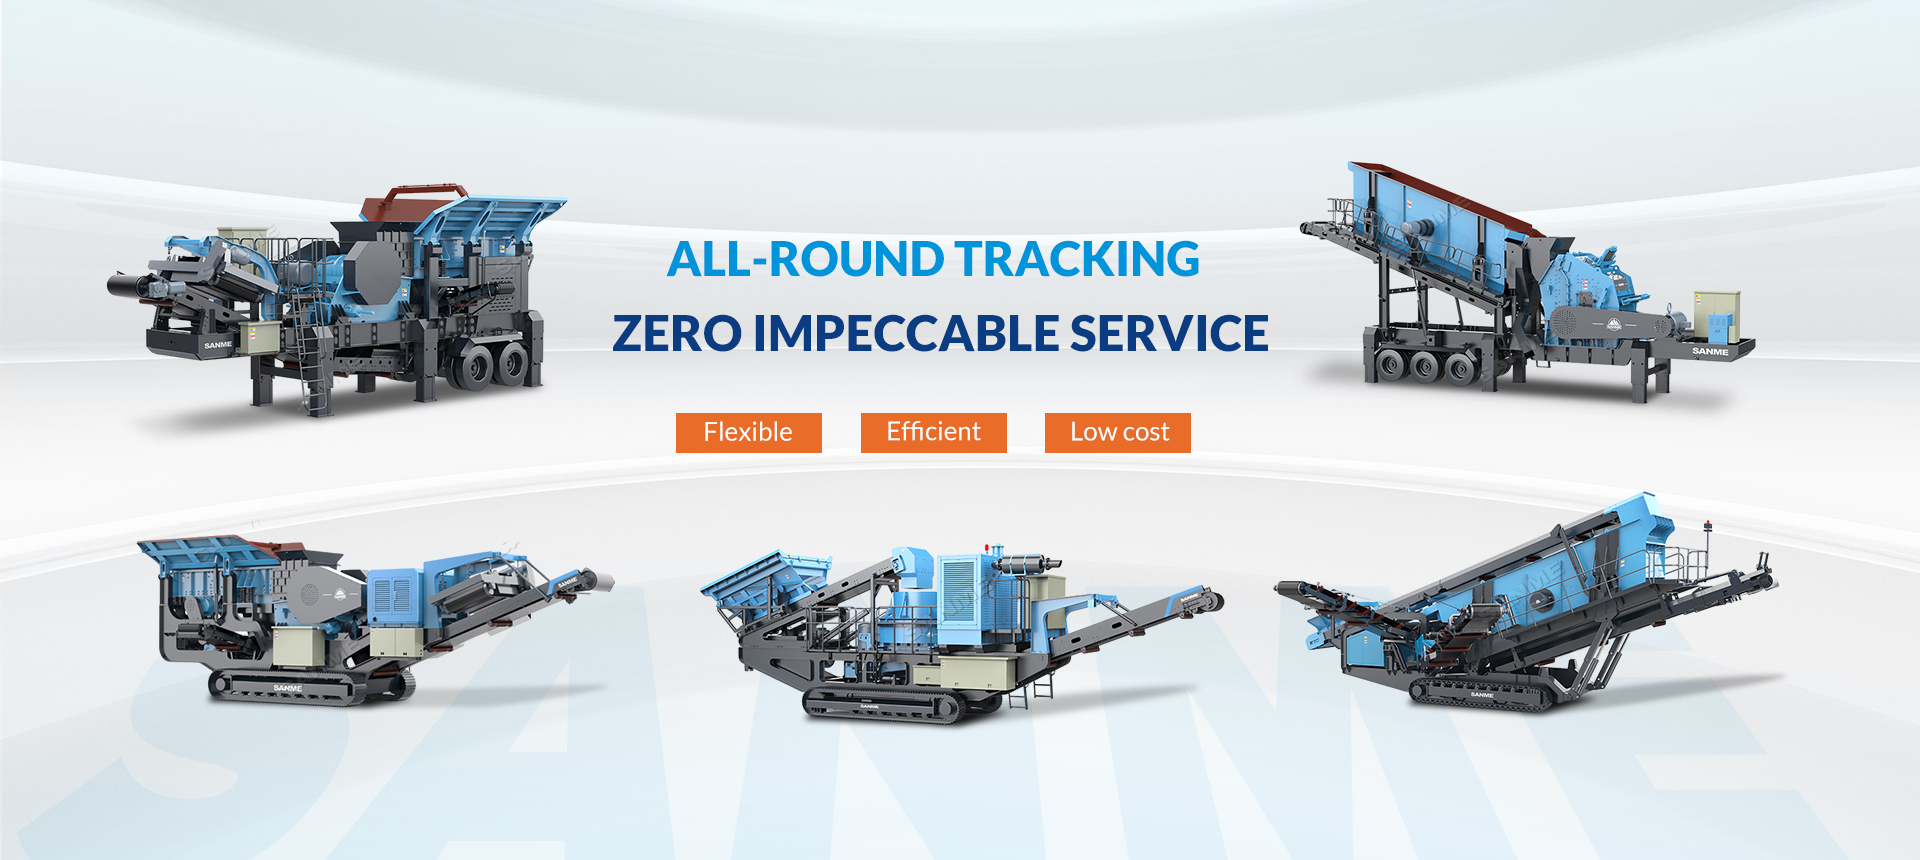 ALL-ROUND TRACKING